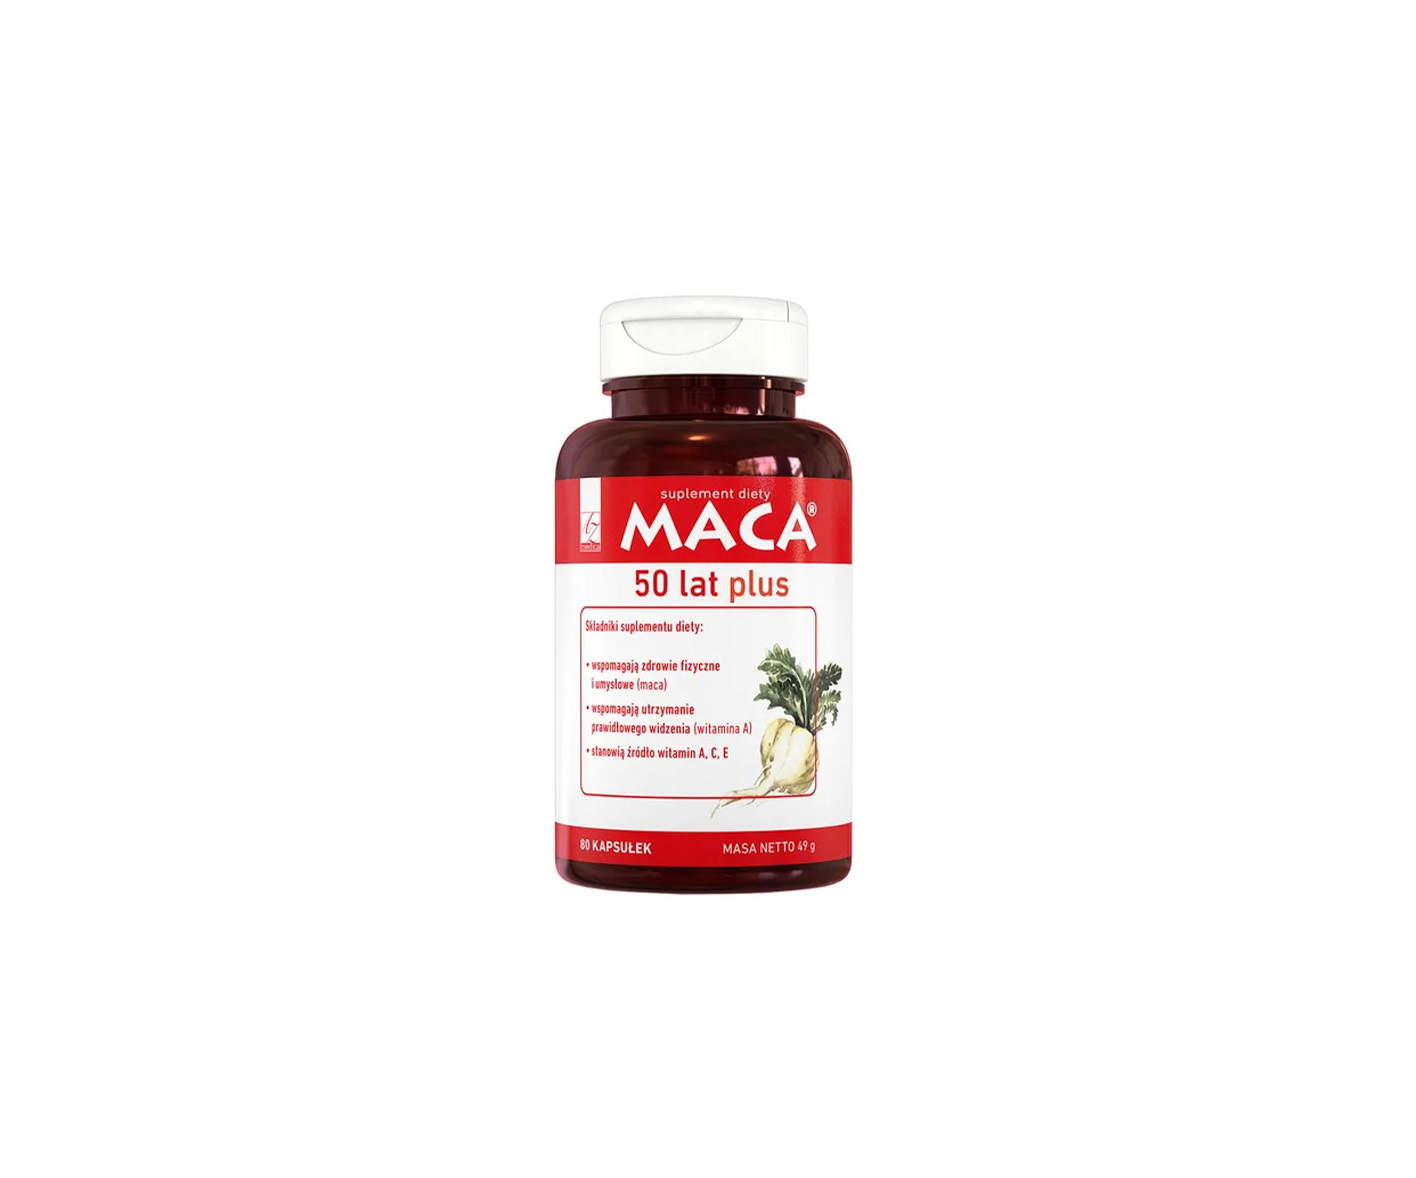 A-Z Medica, Maca 50 lat plus, suplement diety